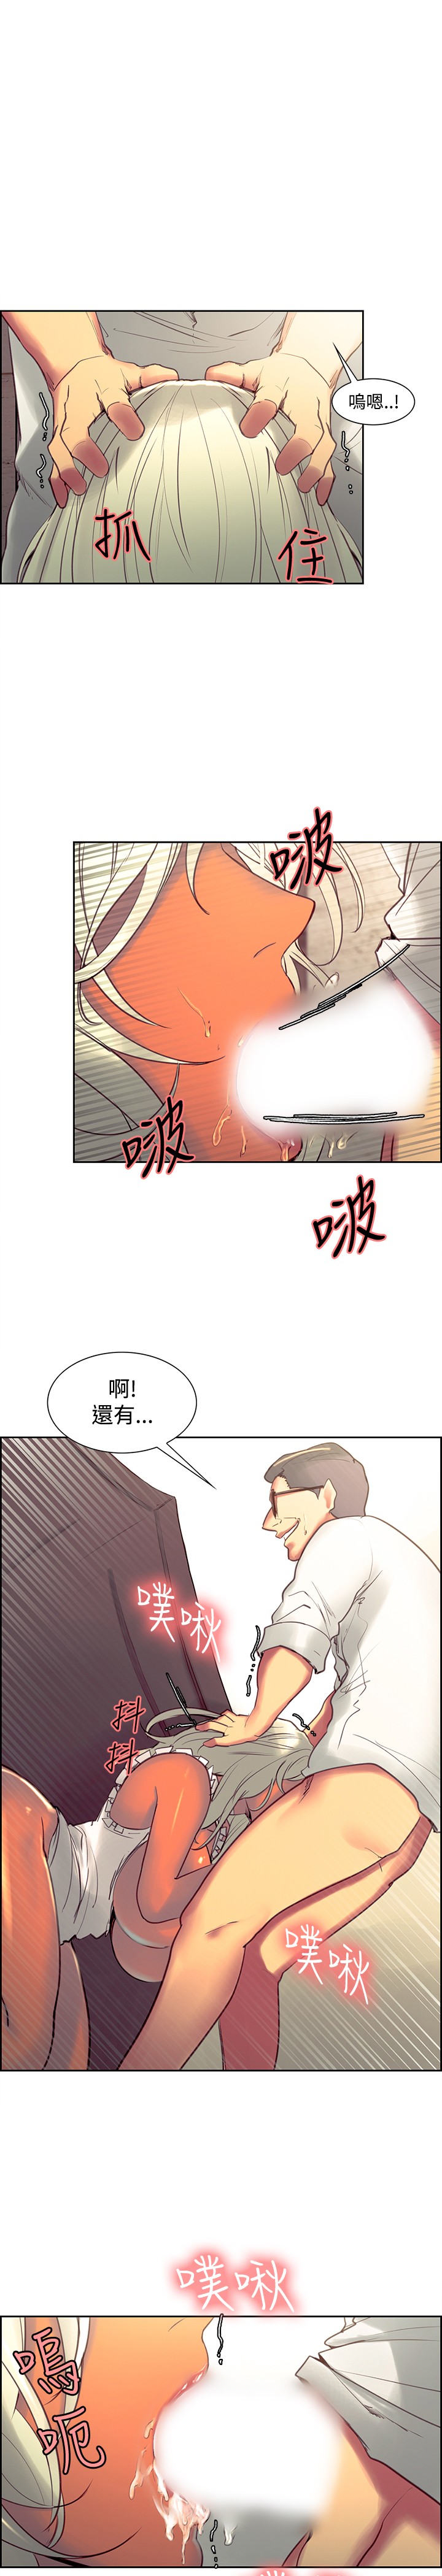 [Serious] Domesticate the Housekeeper 调教家政妇 Ch.29~44END [Chinese]中文 